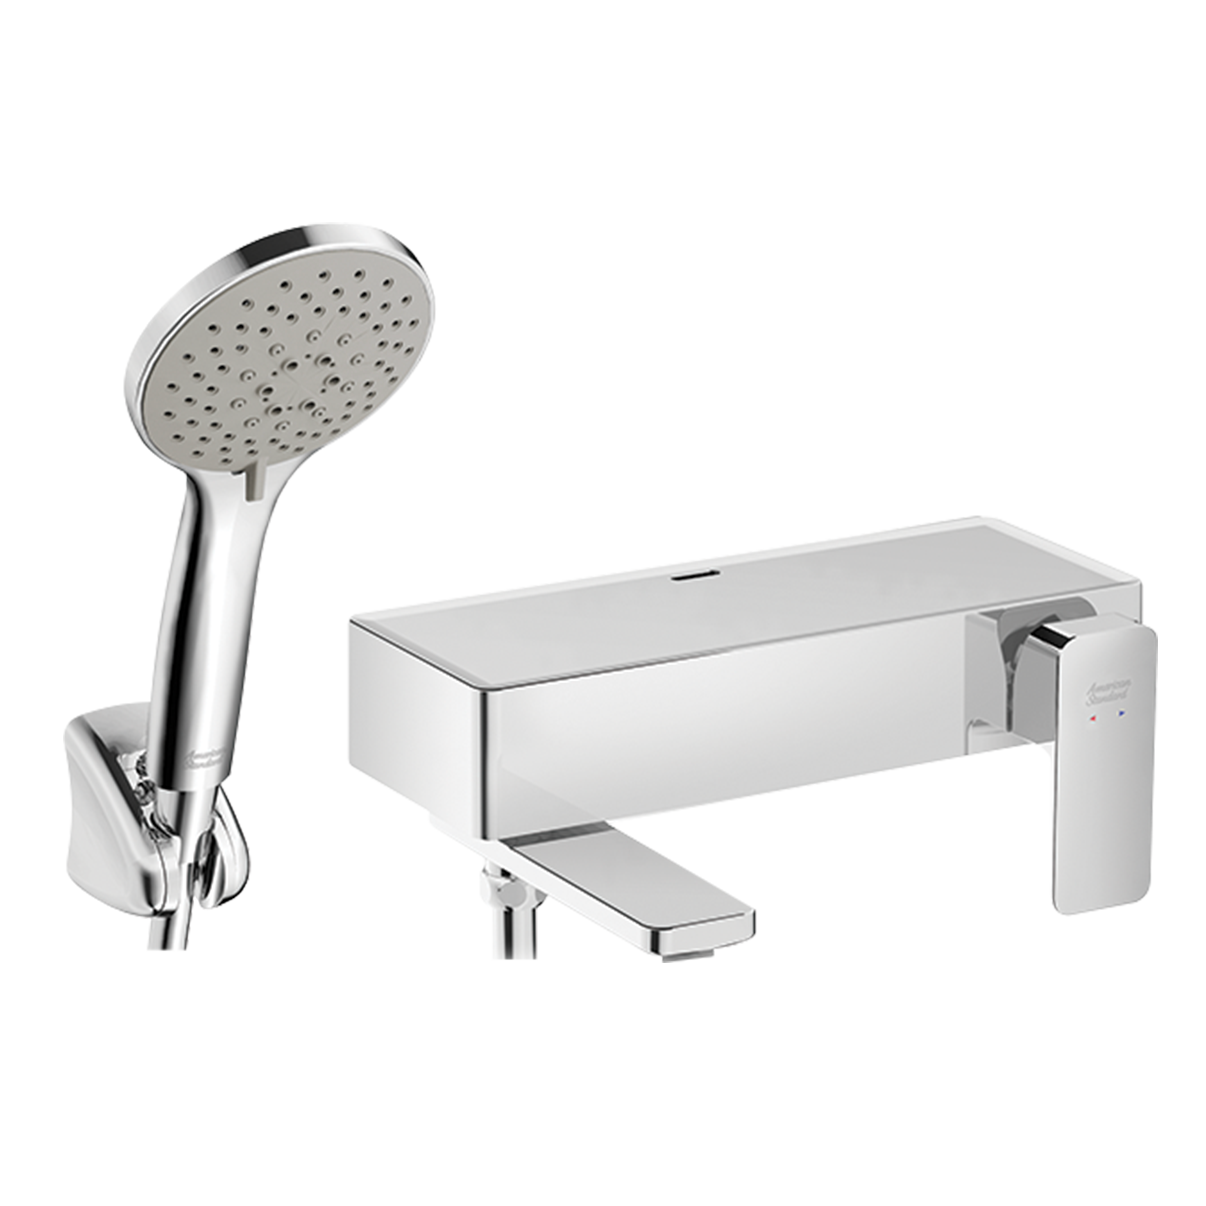 fittings-Exposed_Bath_Shower_Mixer_with_Shower_Kit.png